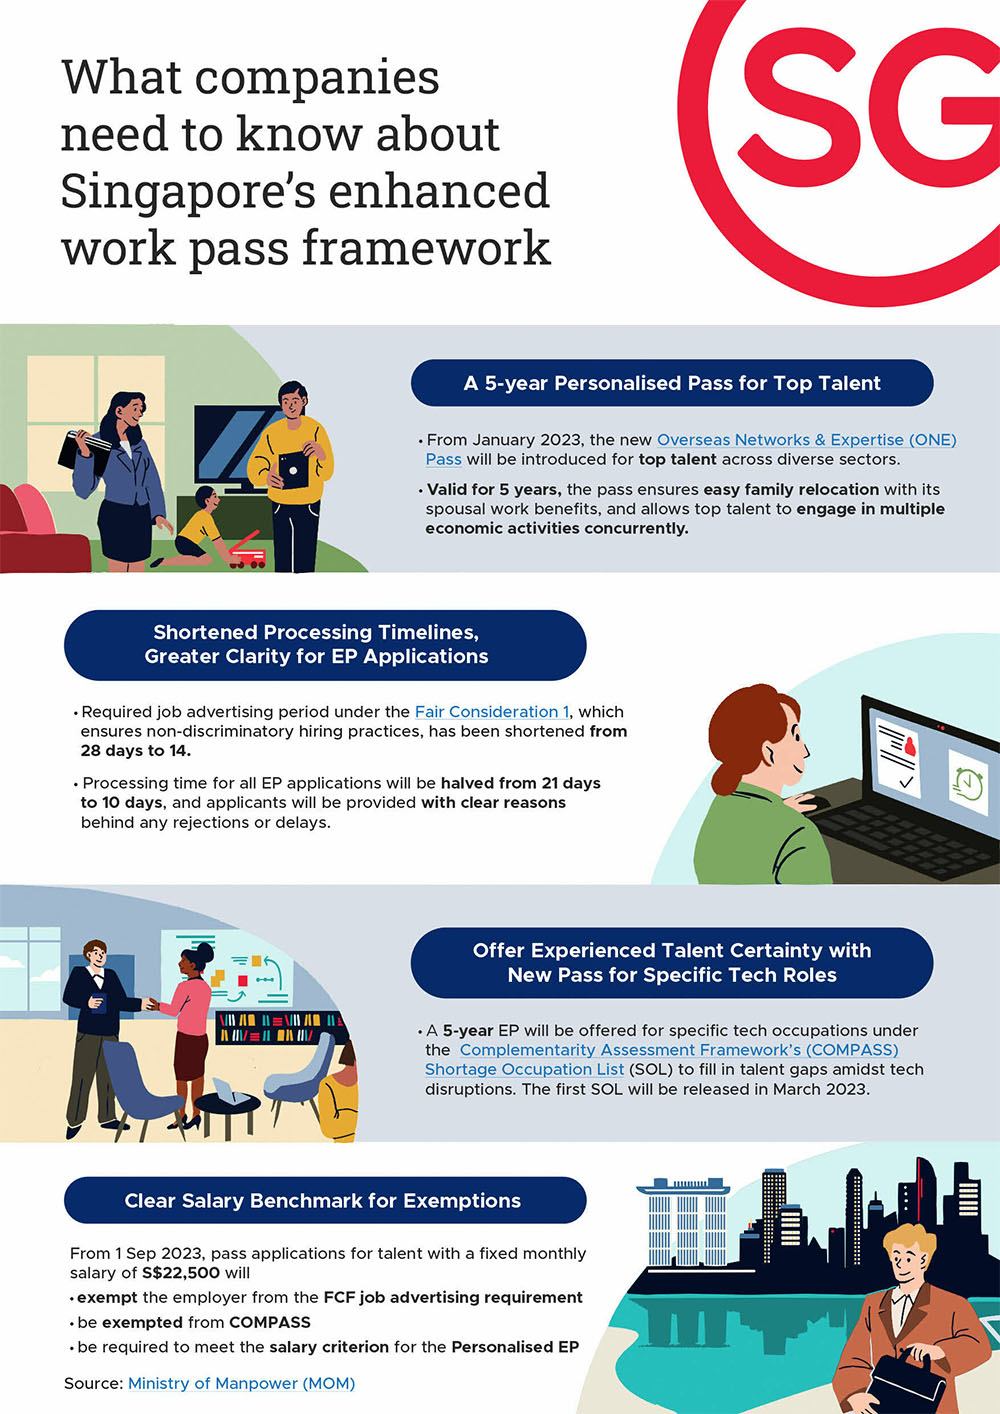 what compainies need to know about singapore's enhanced work pass framework infographics